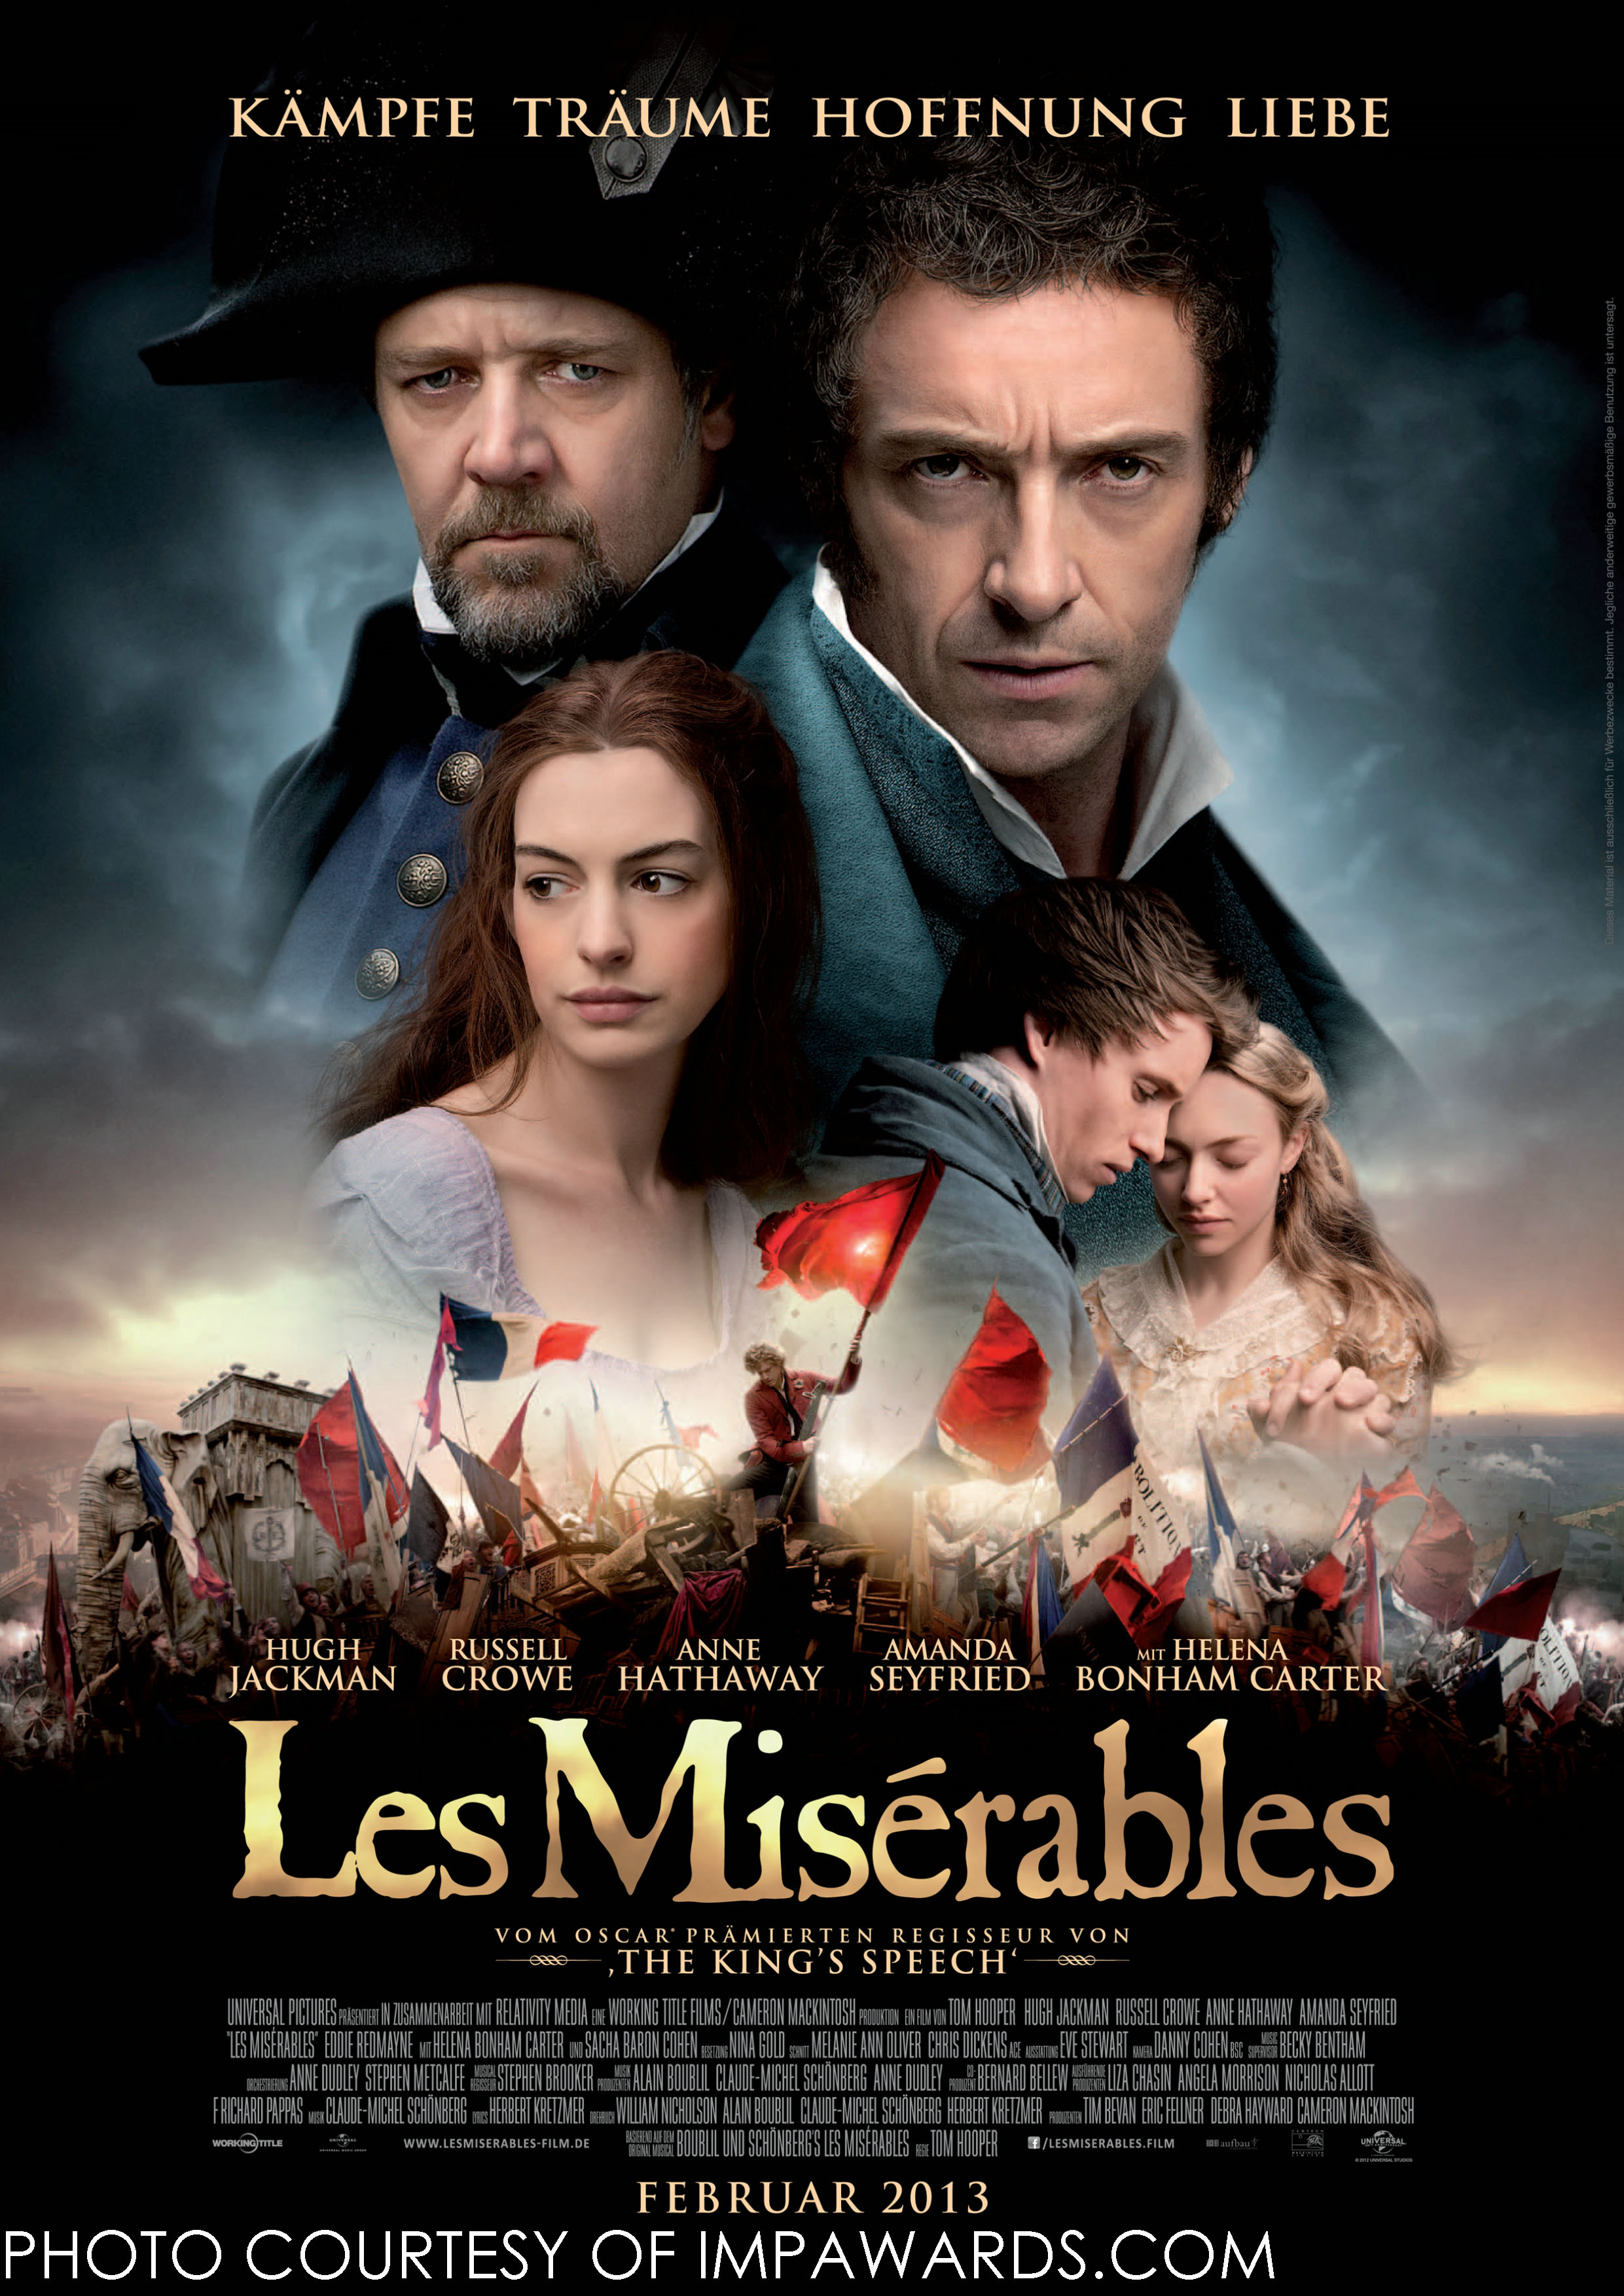 Les Miserables: the best movie in theaters - The Mycenaean